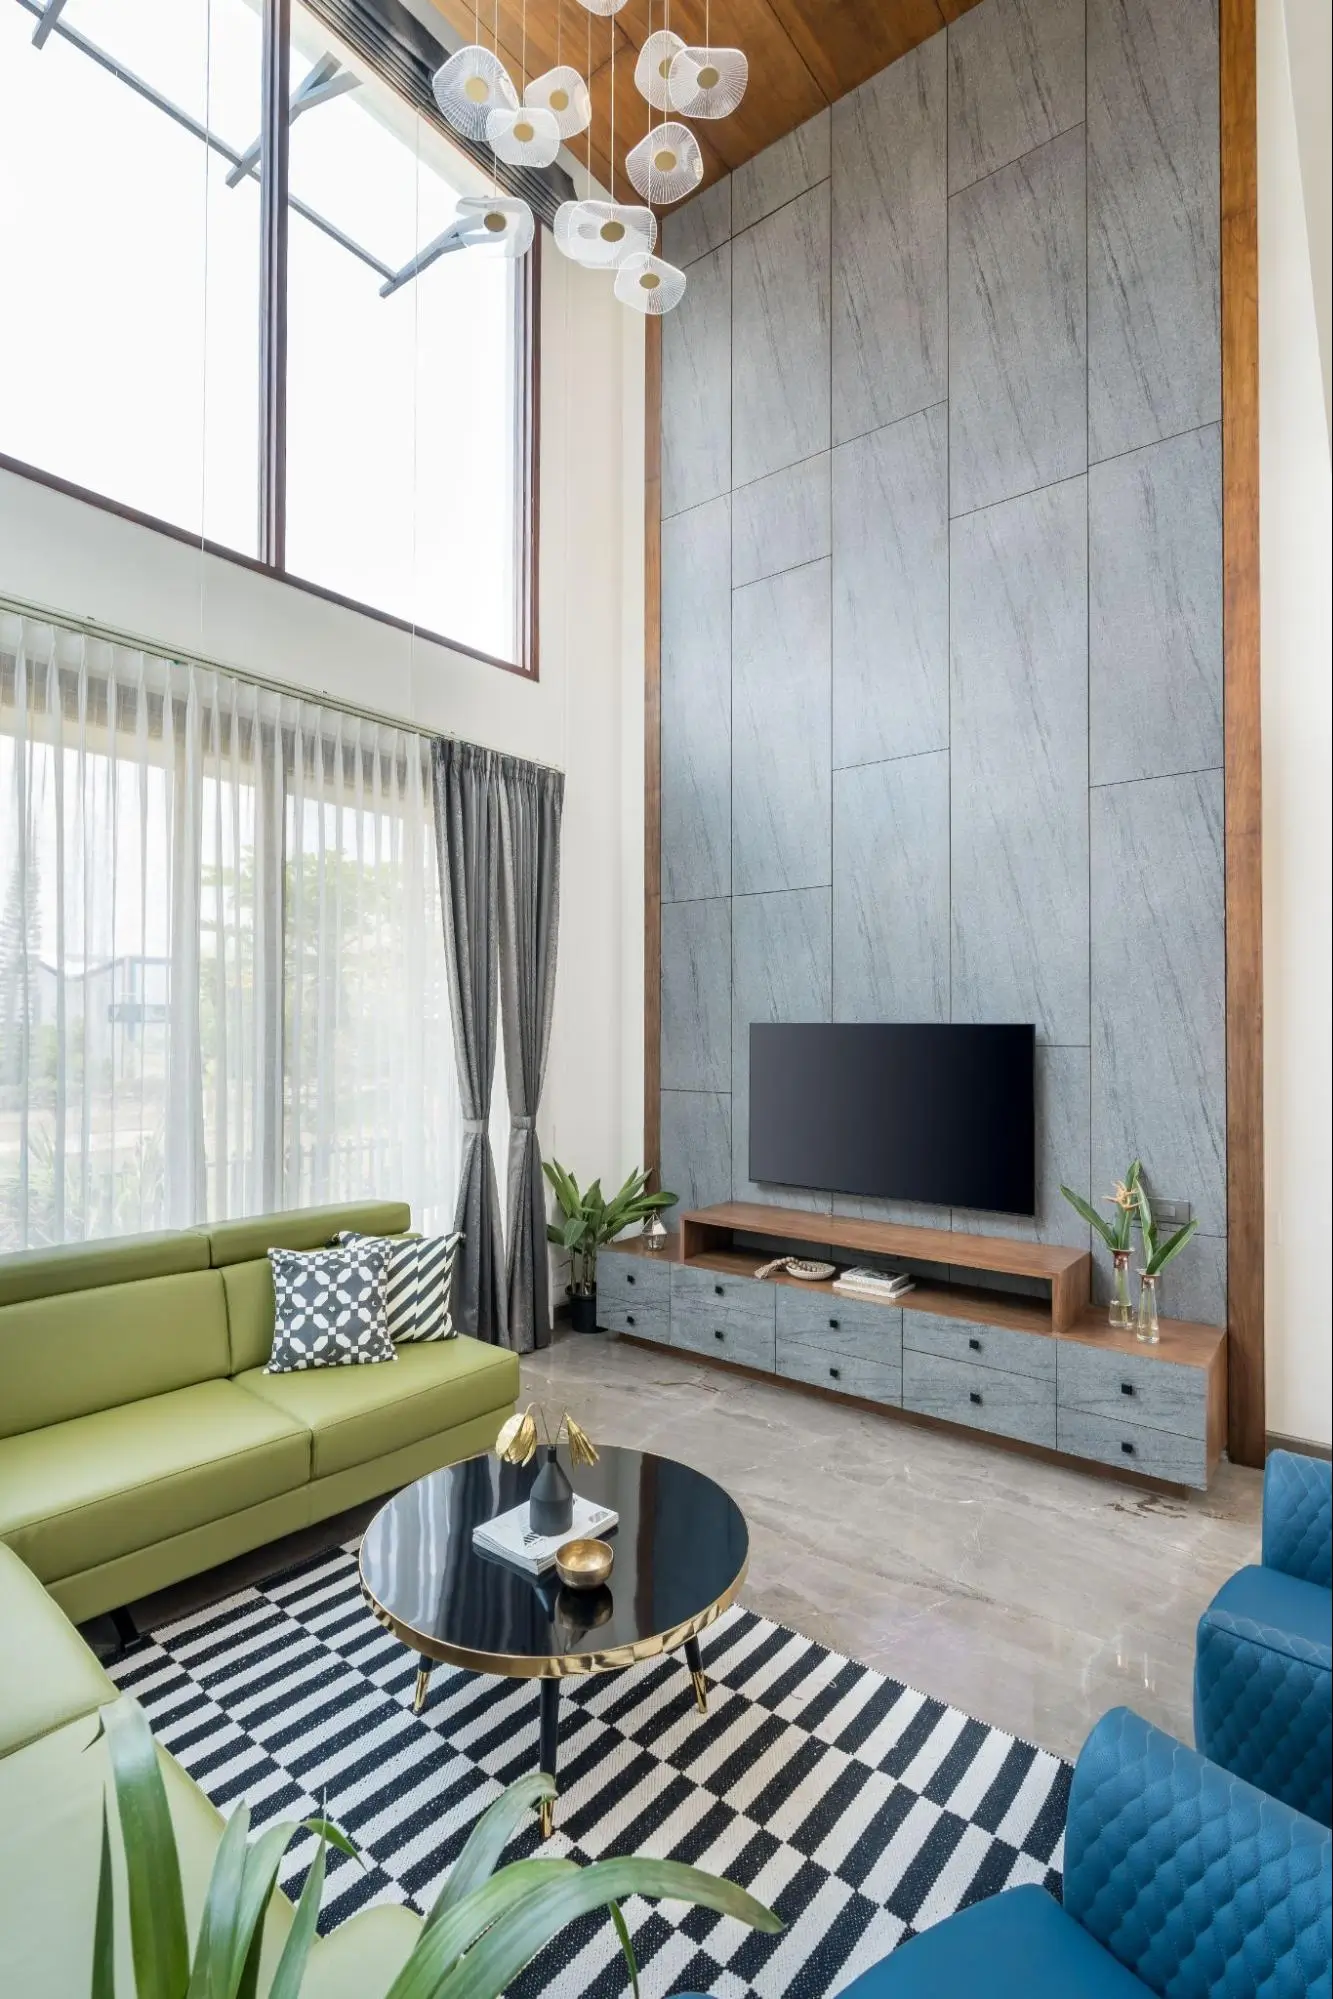 Luxurious tv unit design catching guests' eyes in double height living room